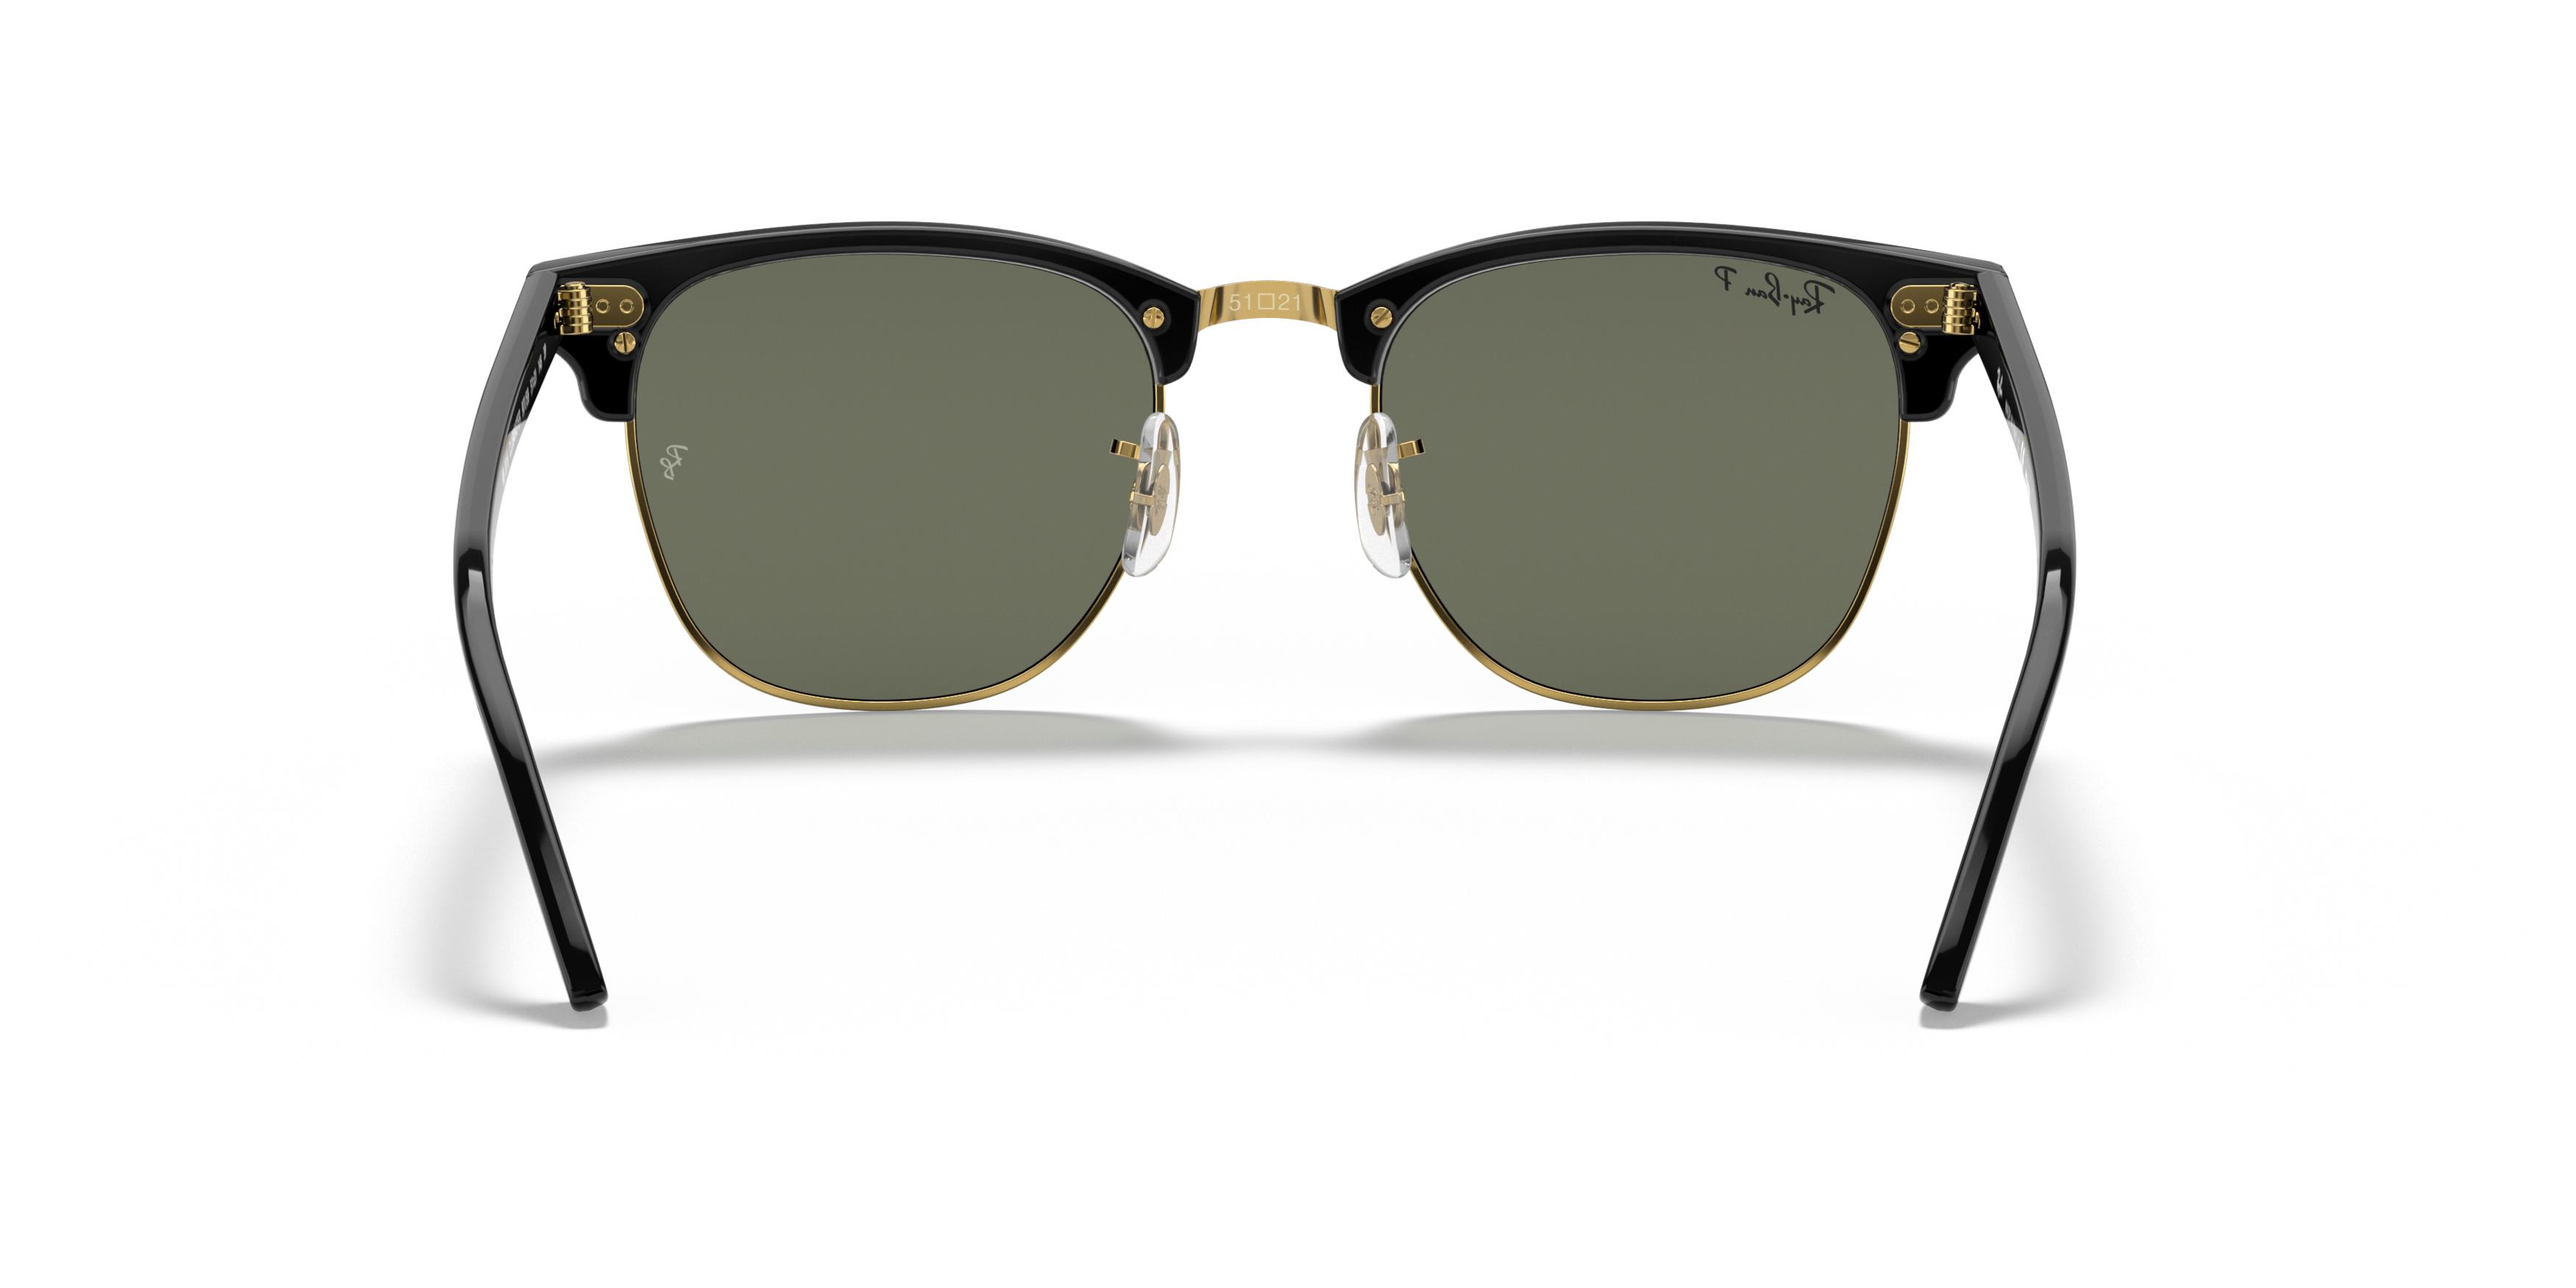 [products.image.detail02] Ray-Ban Clubmaster 0RB3016 901/58